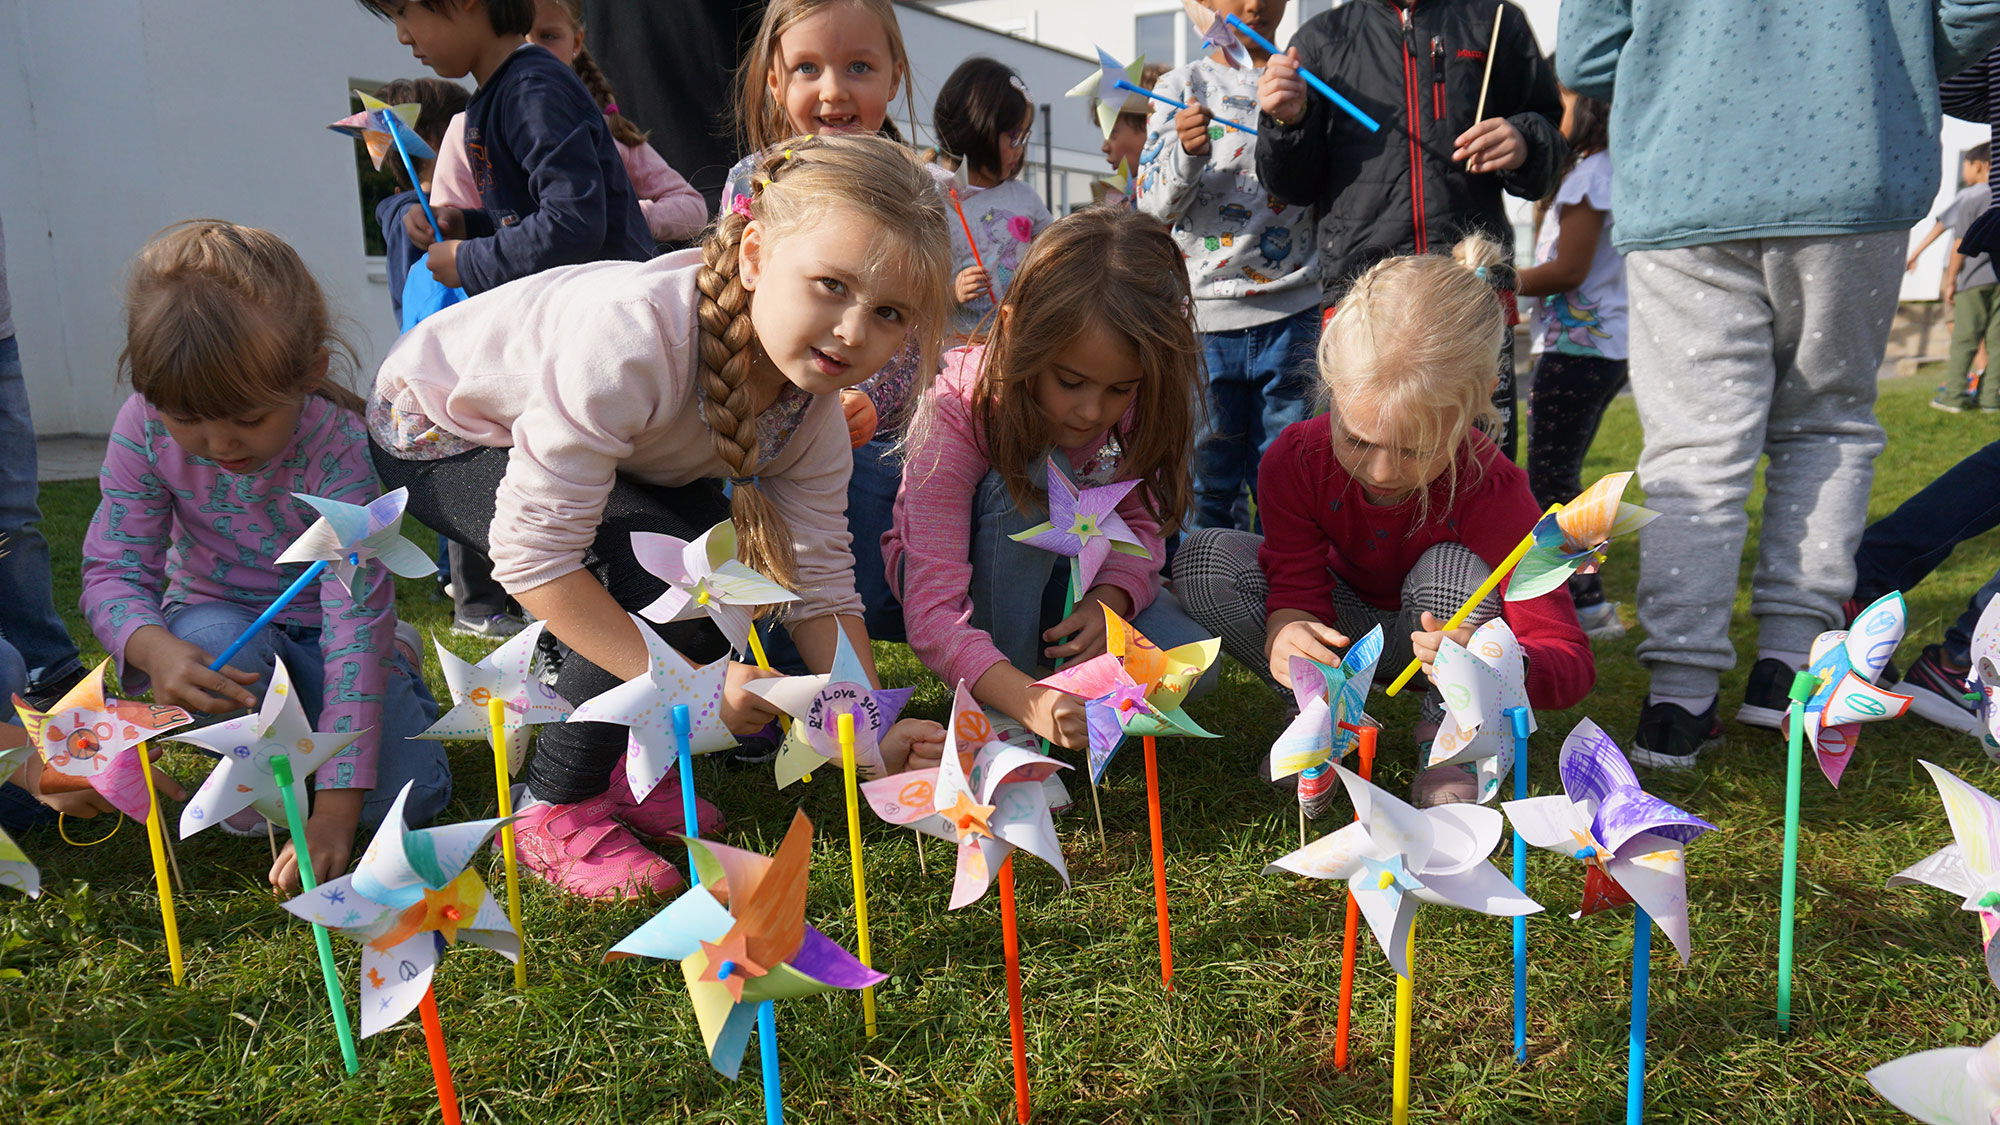 Children set up small pinwheels on the lawn.